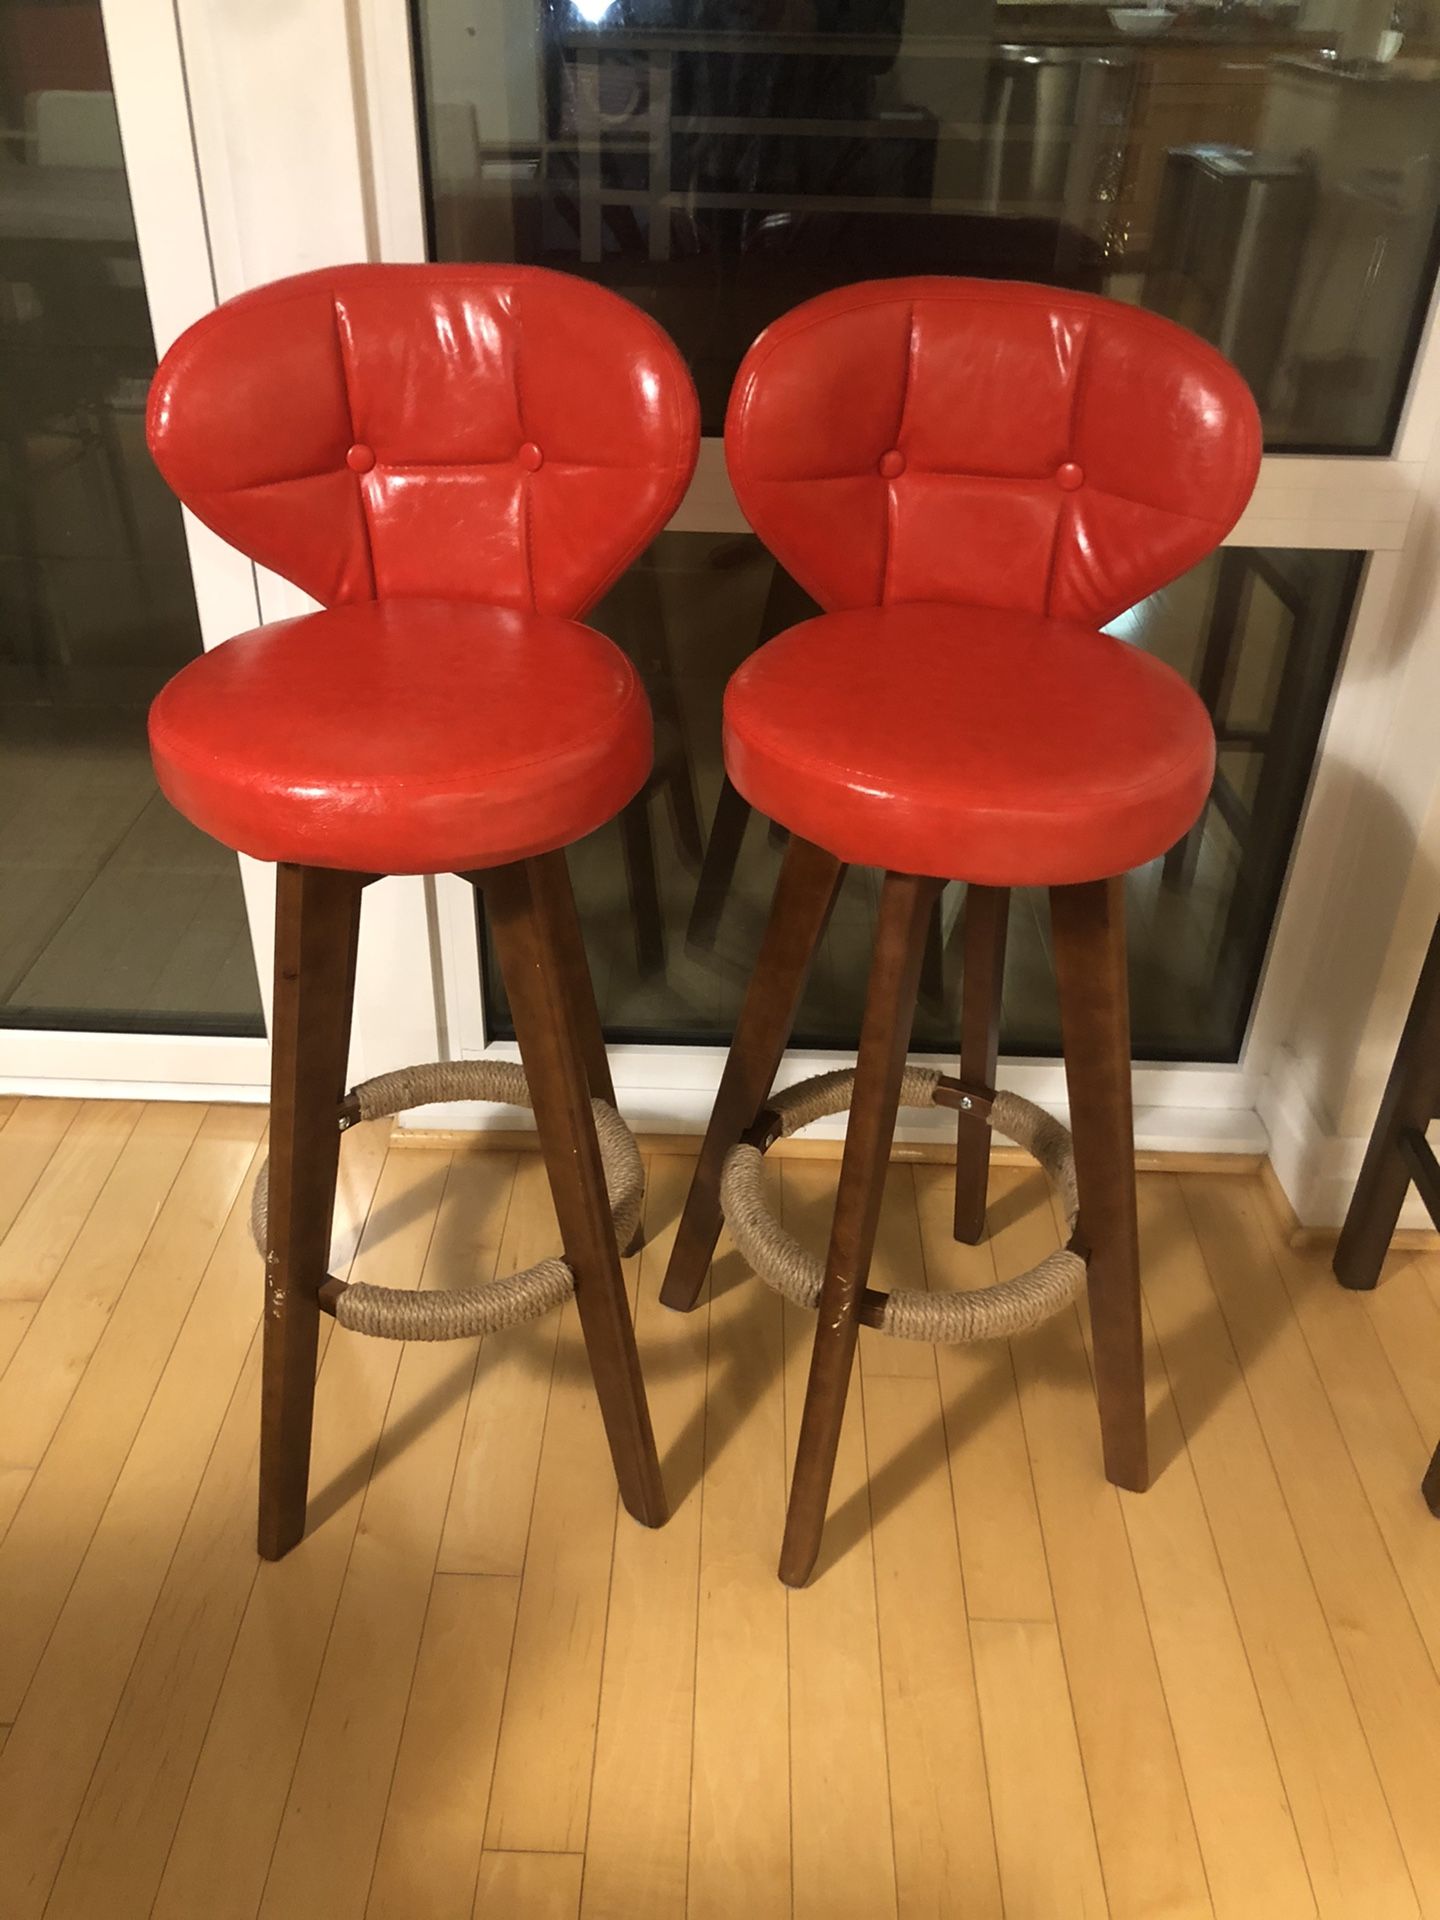 Two Red leather bar stools